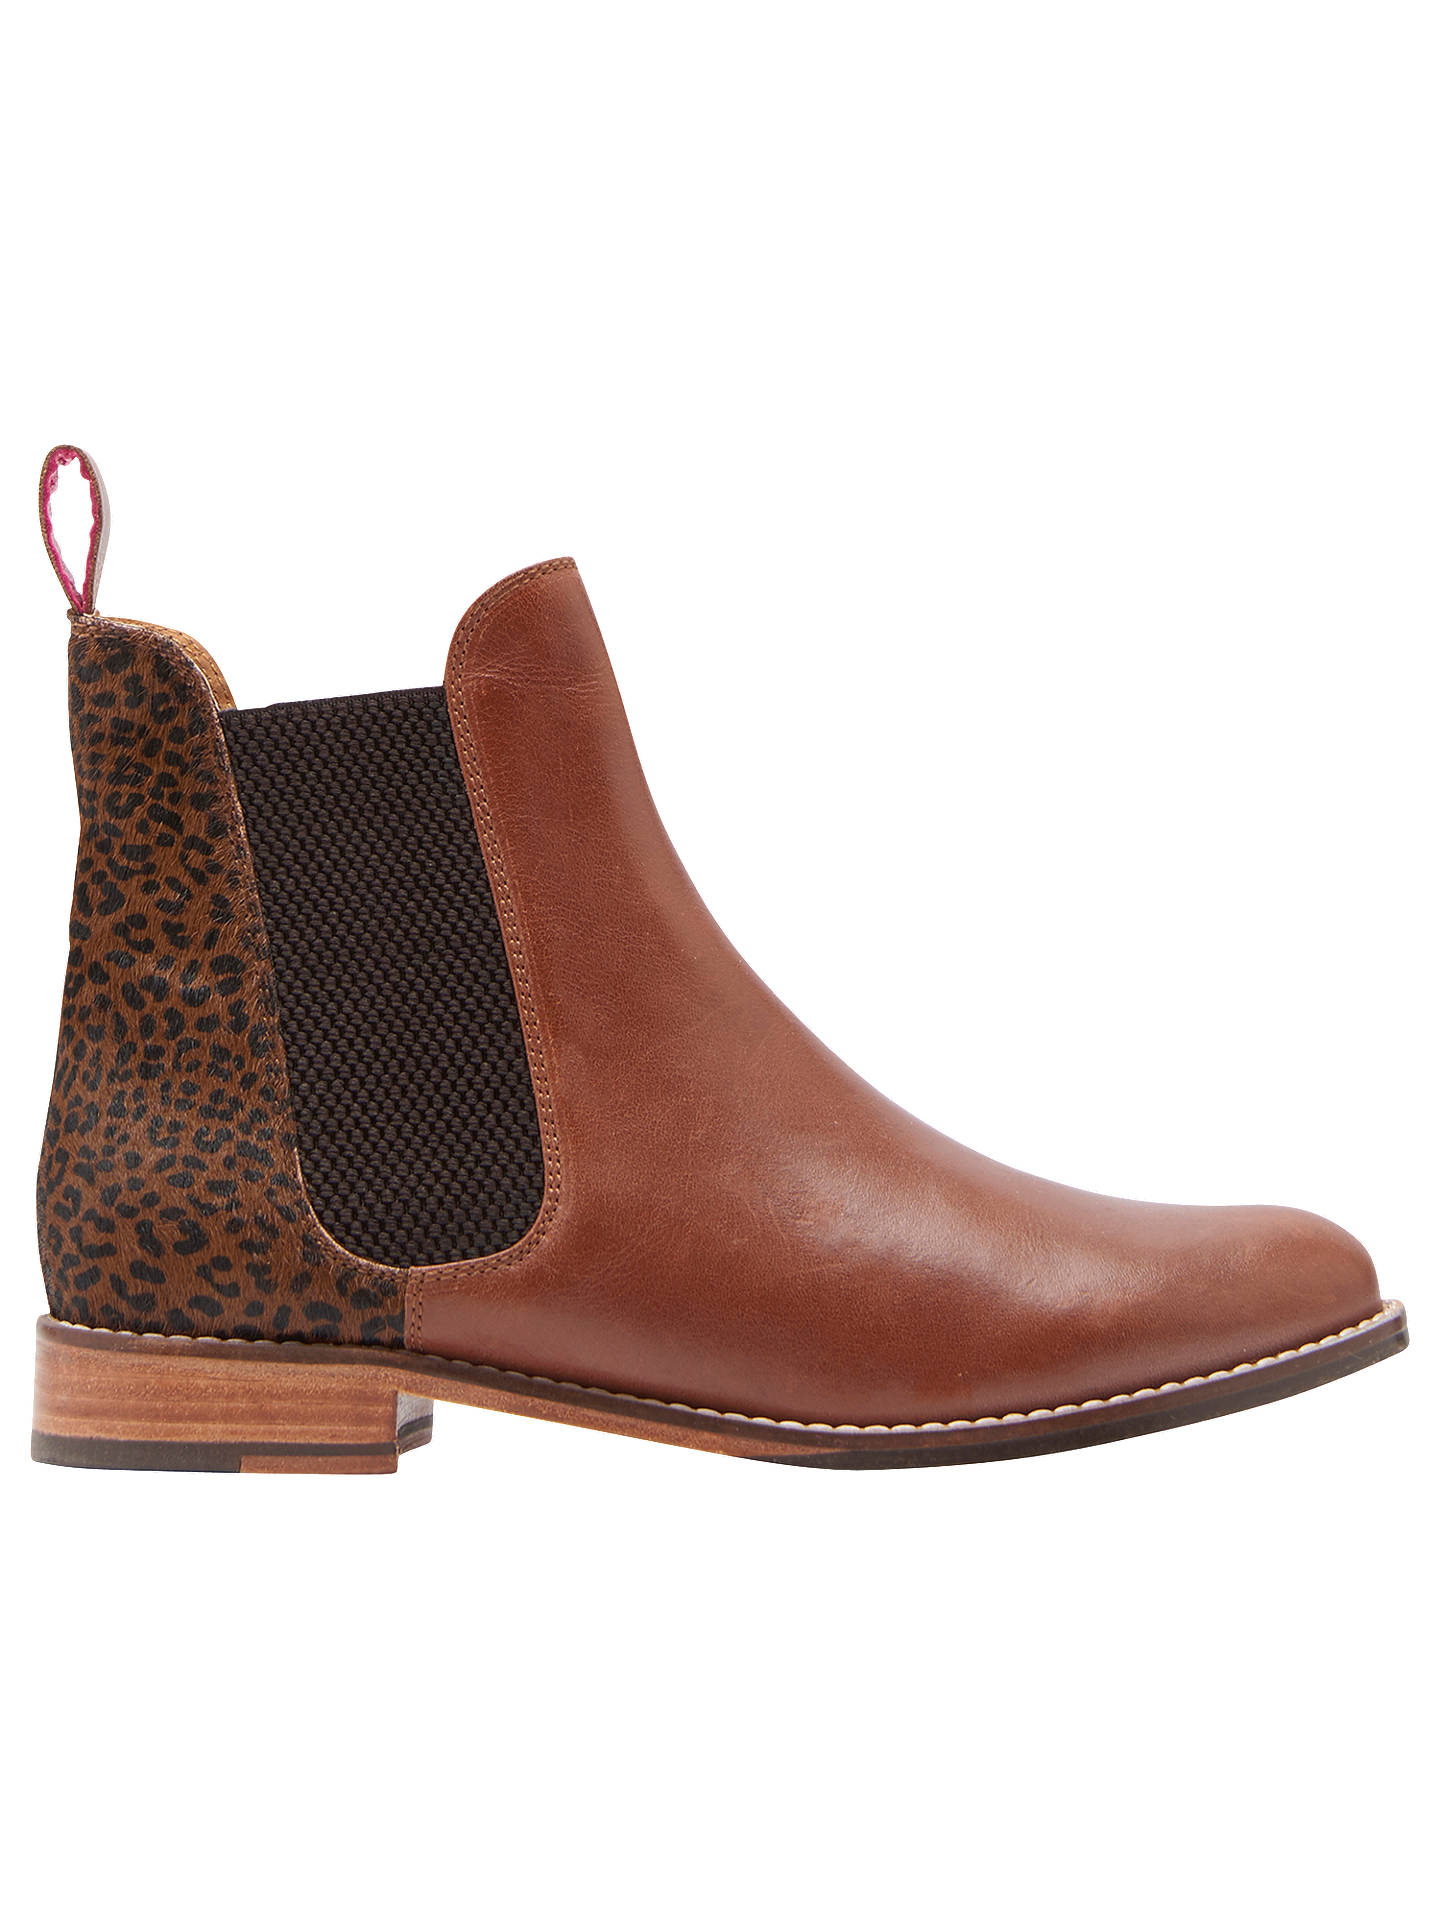 Joules Westbourne Leather Chelsea Boots, Brown/Leopard at John Lewis ...